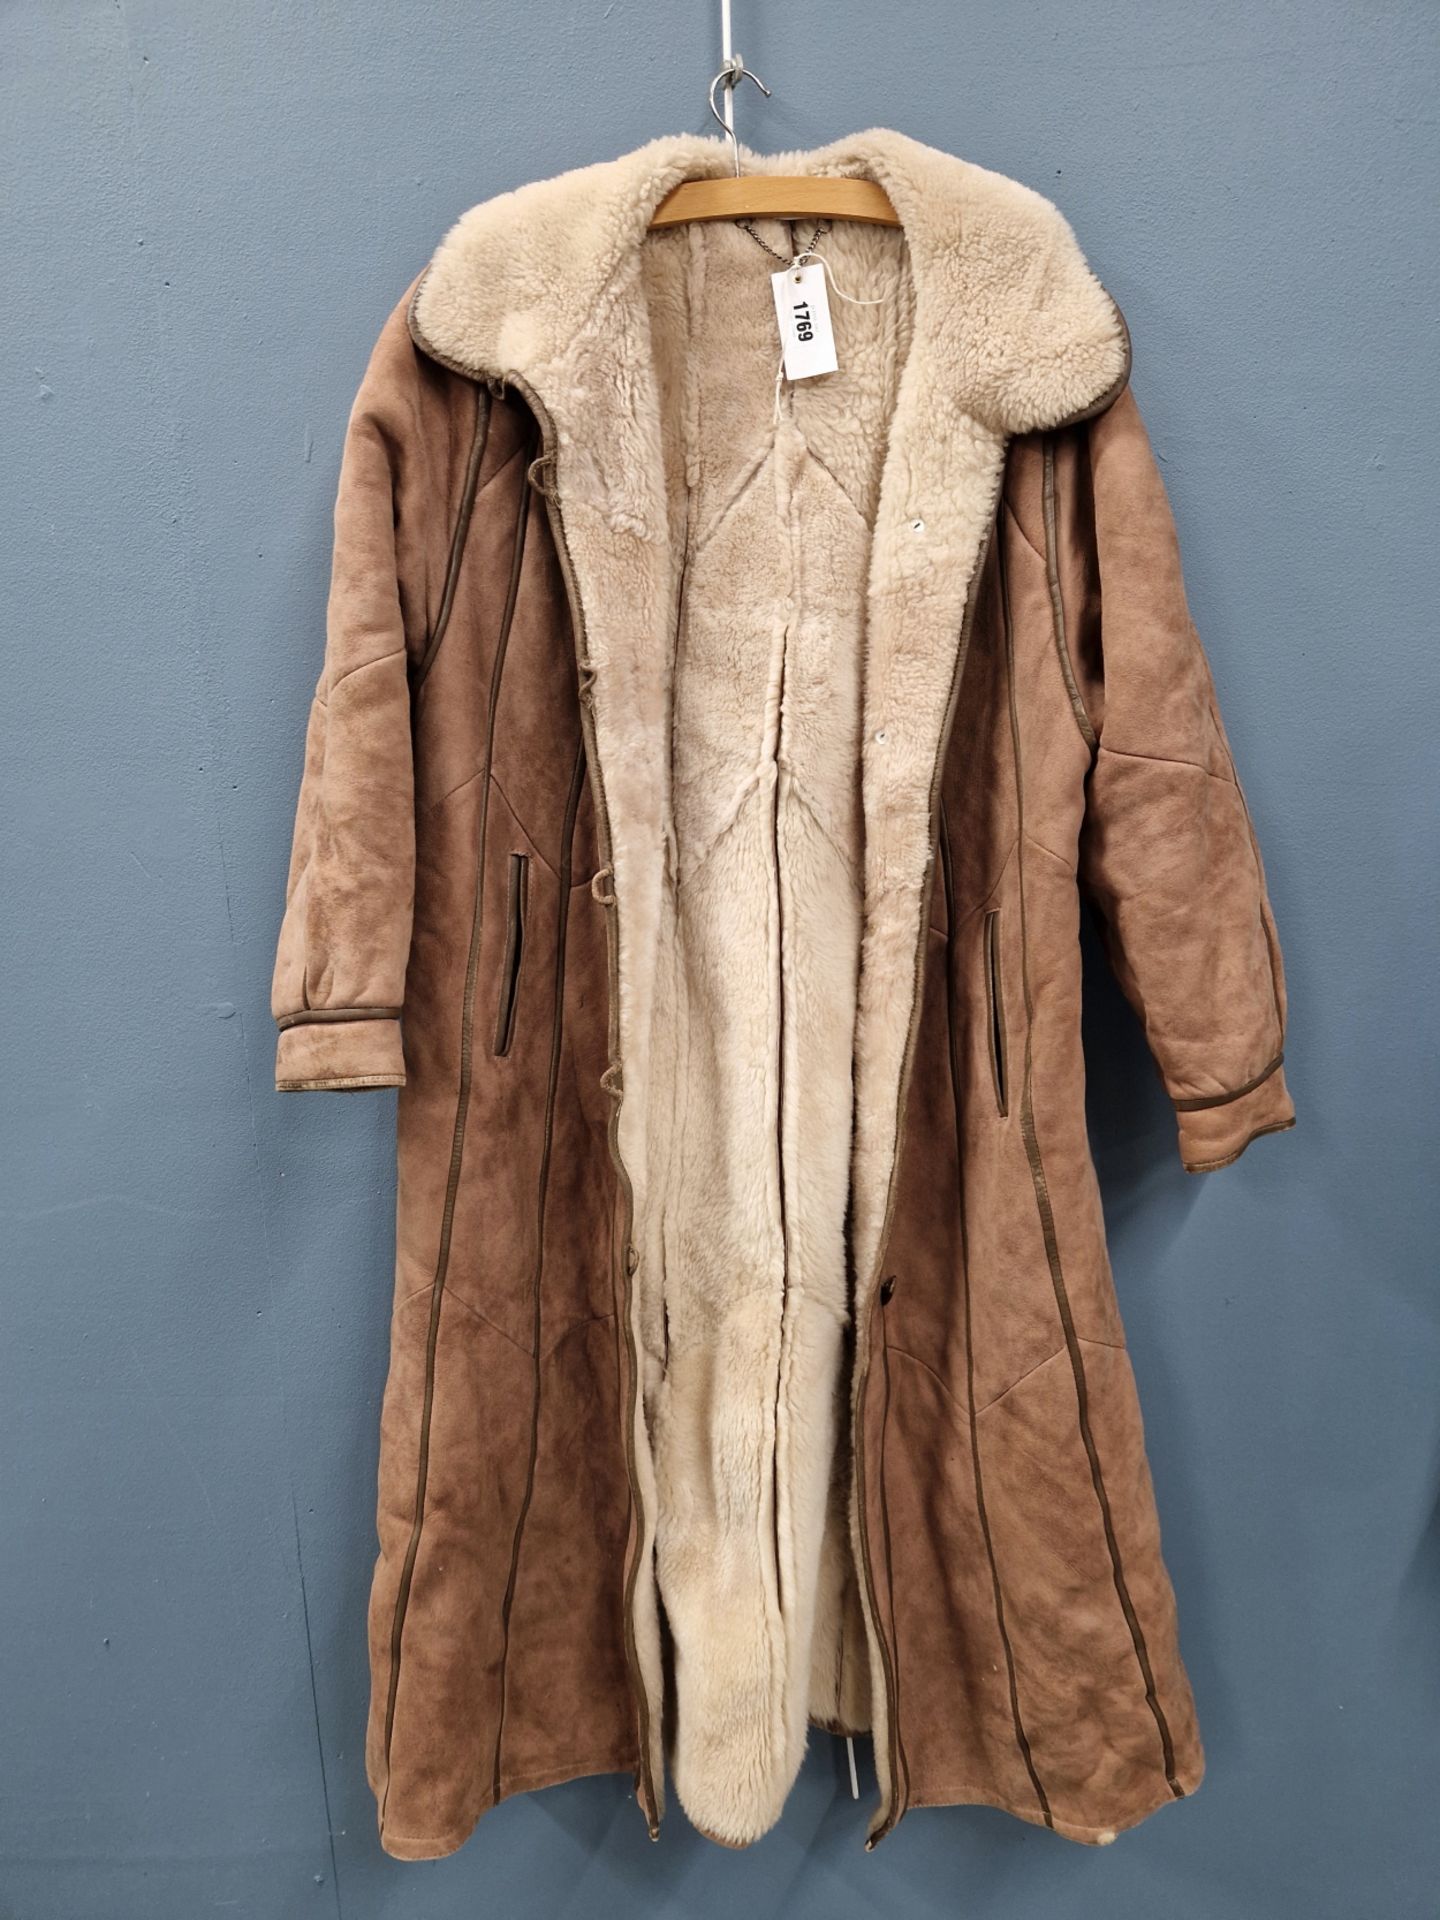 COAT. A FULL LENGTH LAMB SKIN JACKET, MADE IN TURKEY WITH A TAG SIZE 12, PIT TO PIT 54cms,